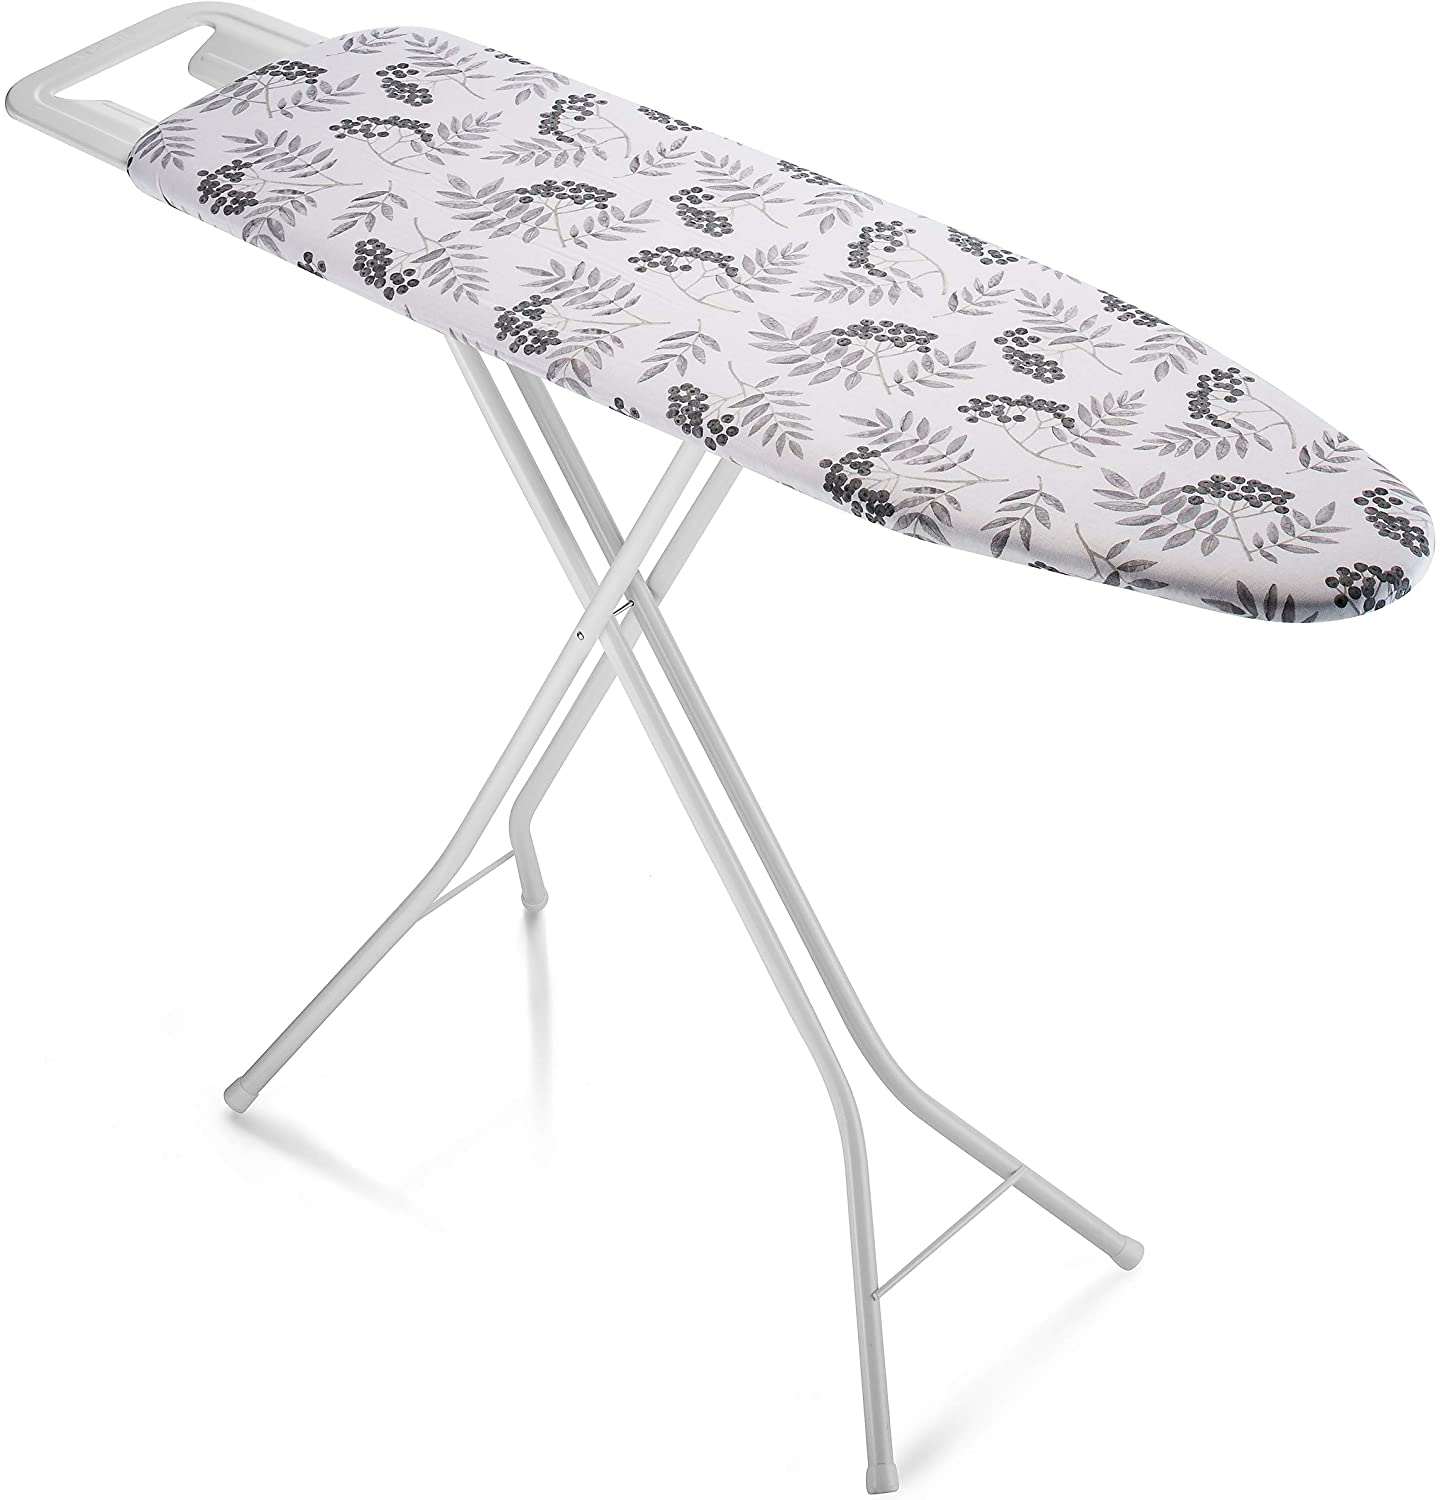 Bartnelli Ironing Board Made in Europe | Iron Board with 4 Layered Cover & Pad, Height Adjustable up to 36